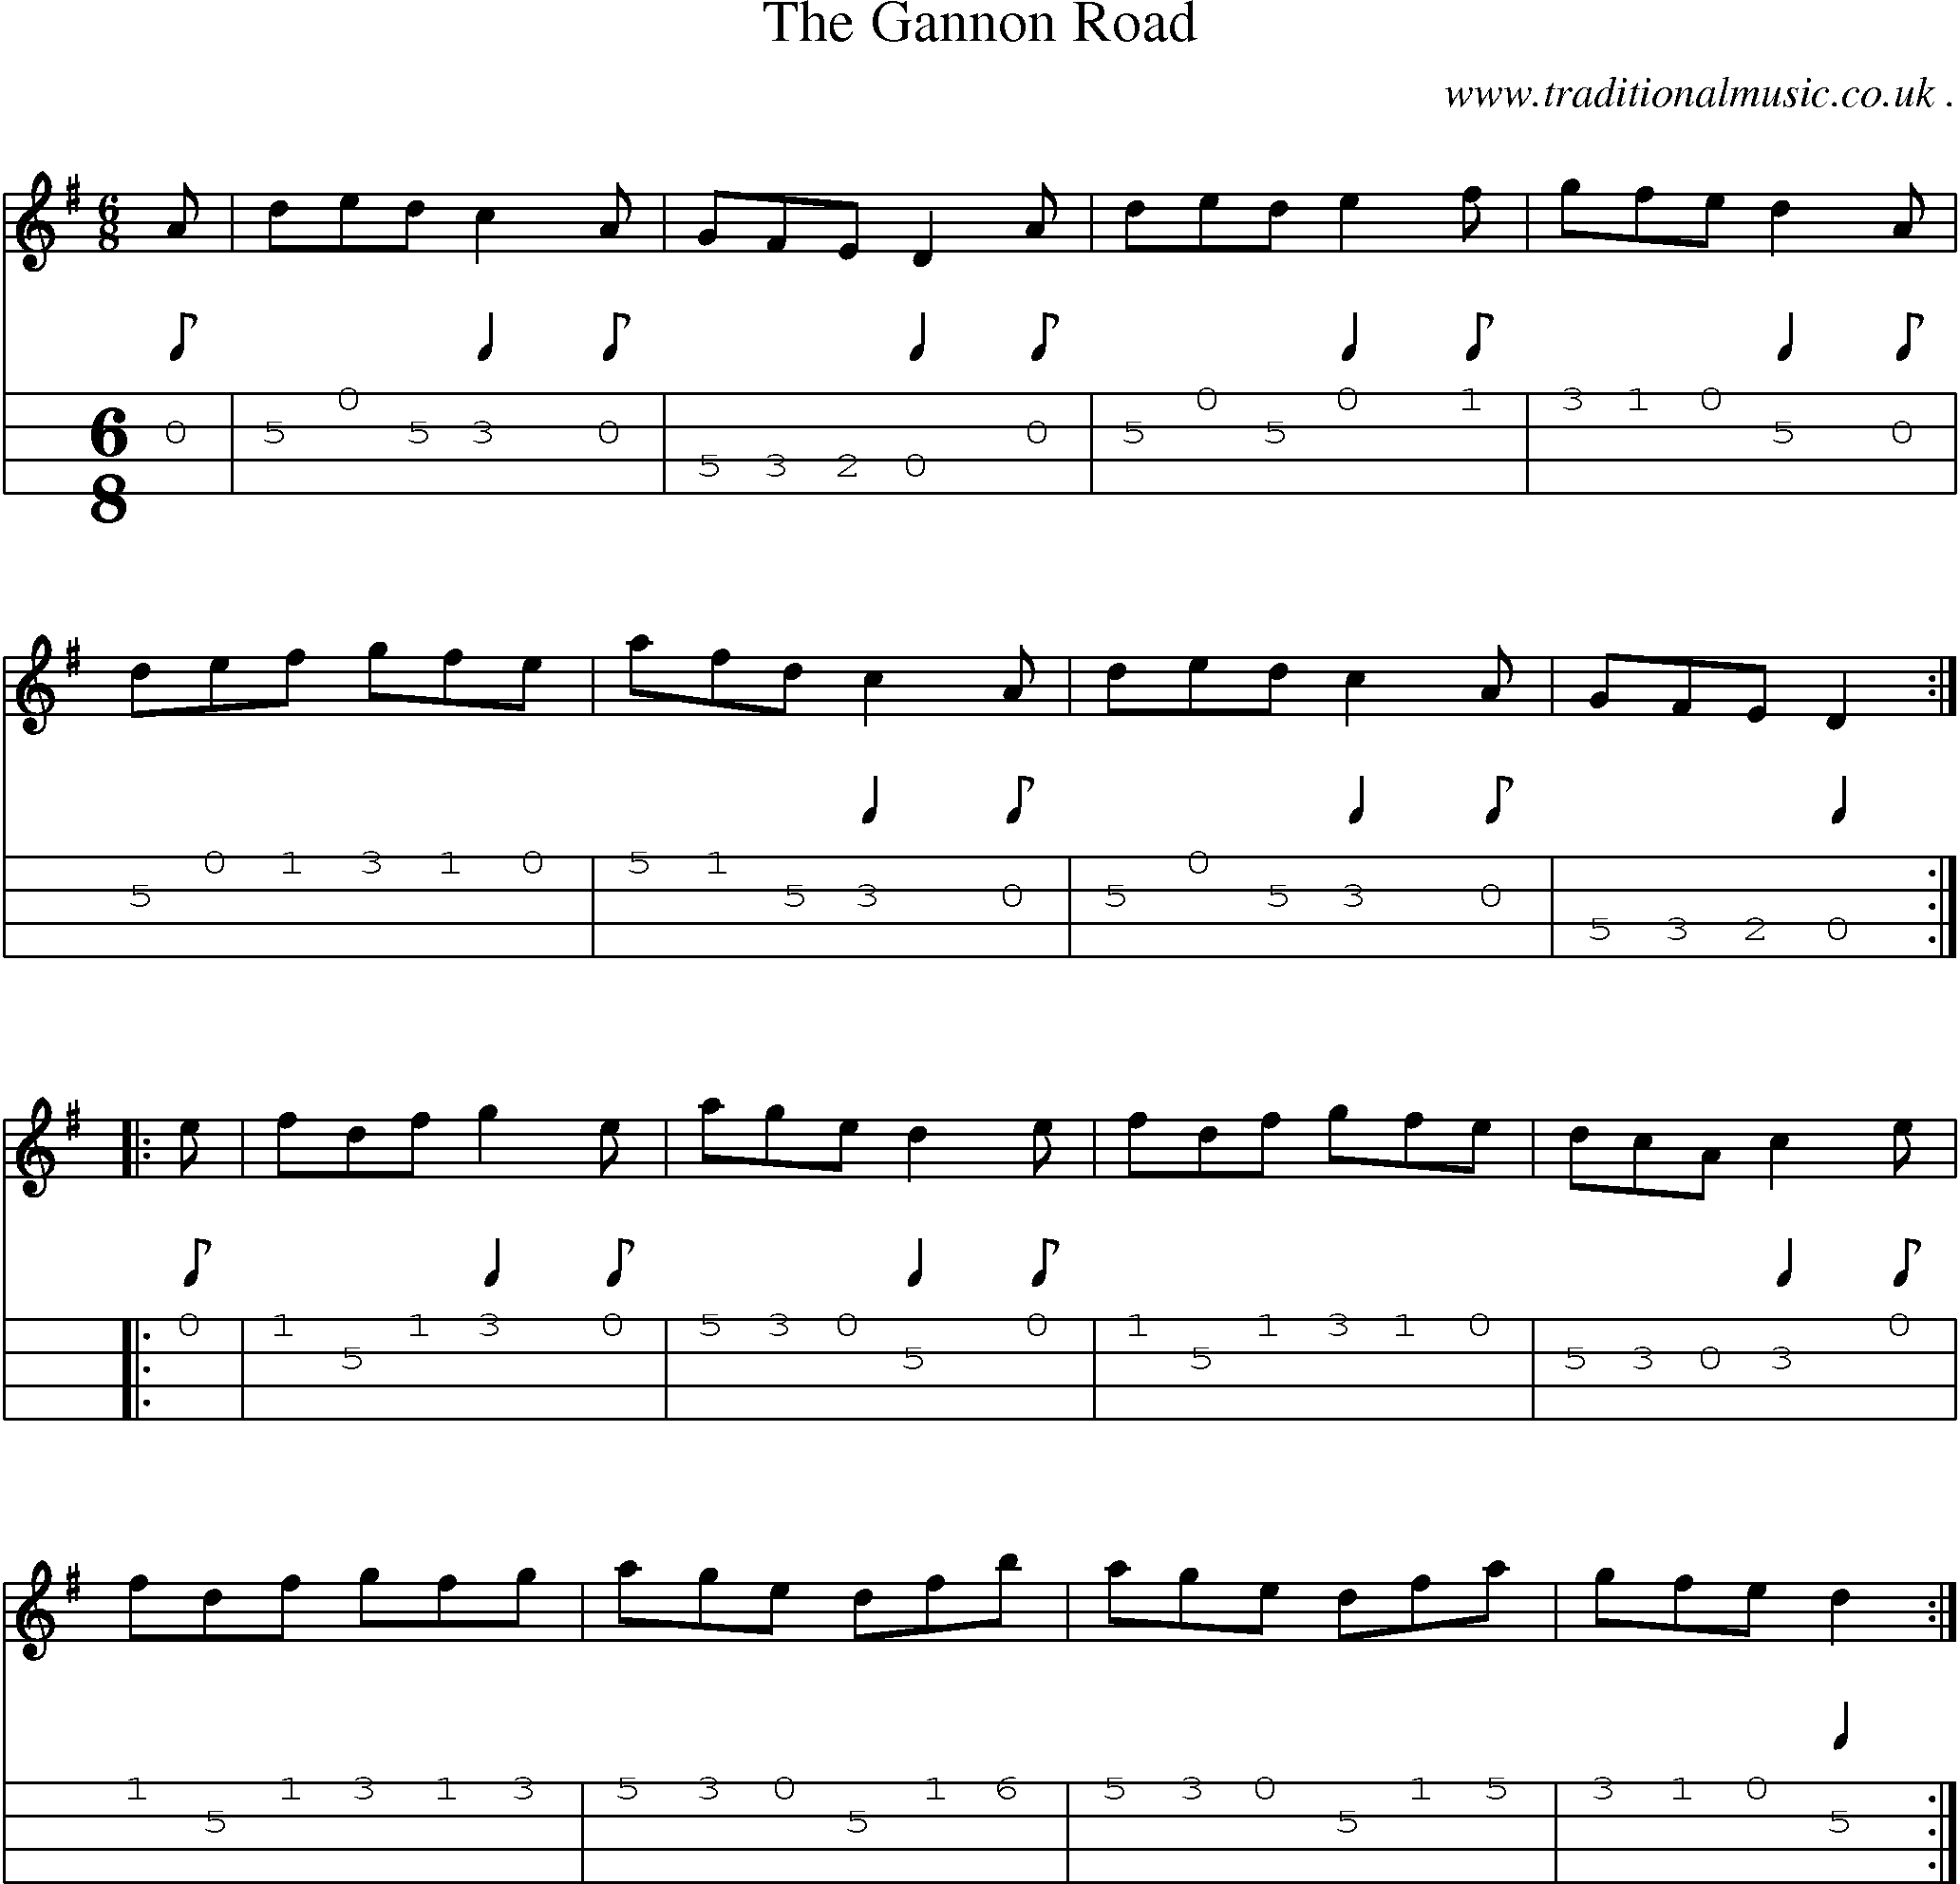 Sheet-Music and Mandolin Tabs for The Gannon Road